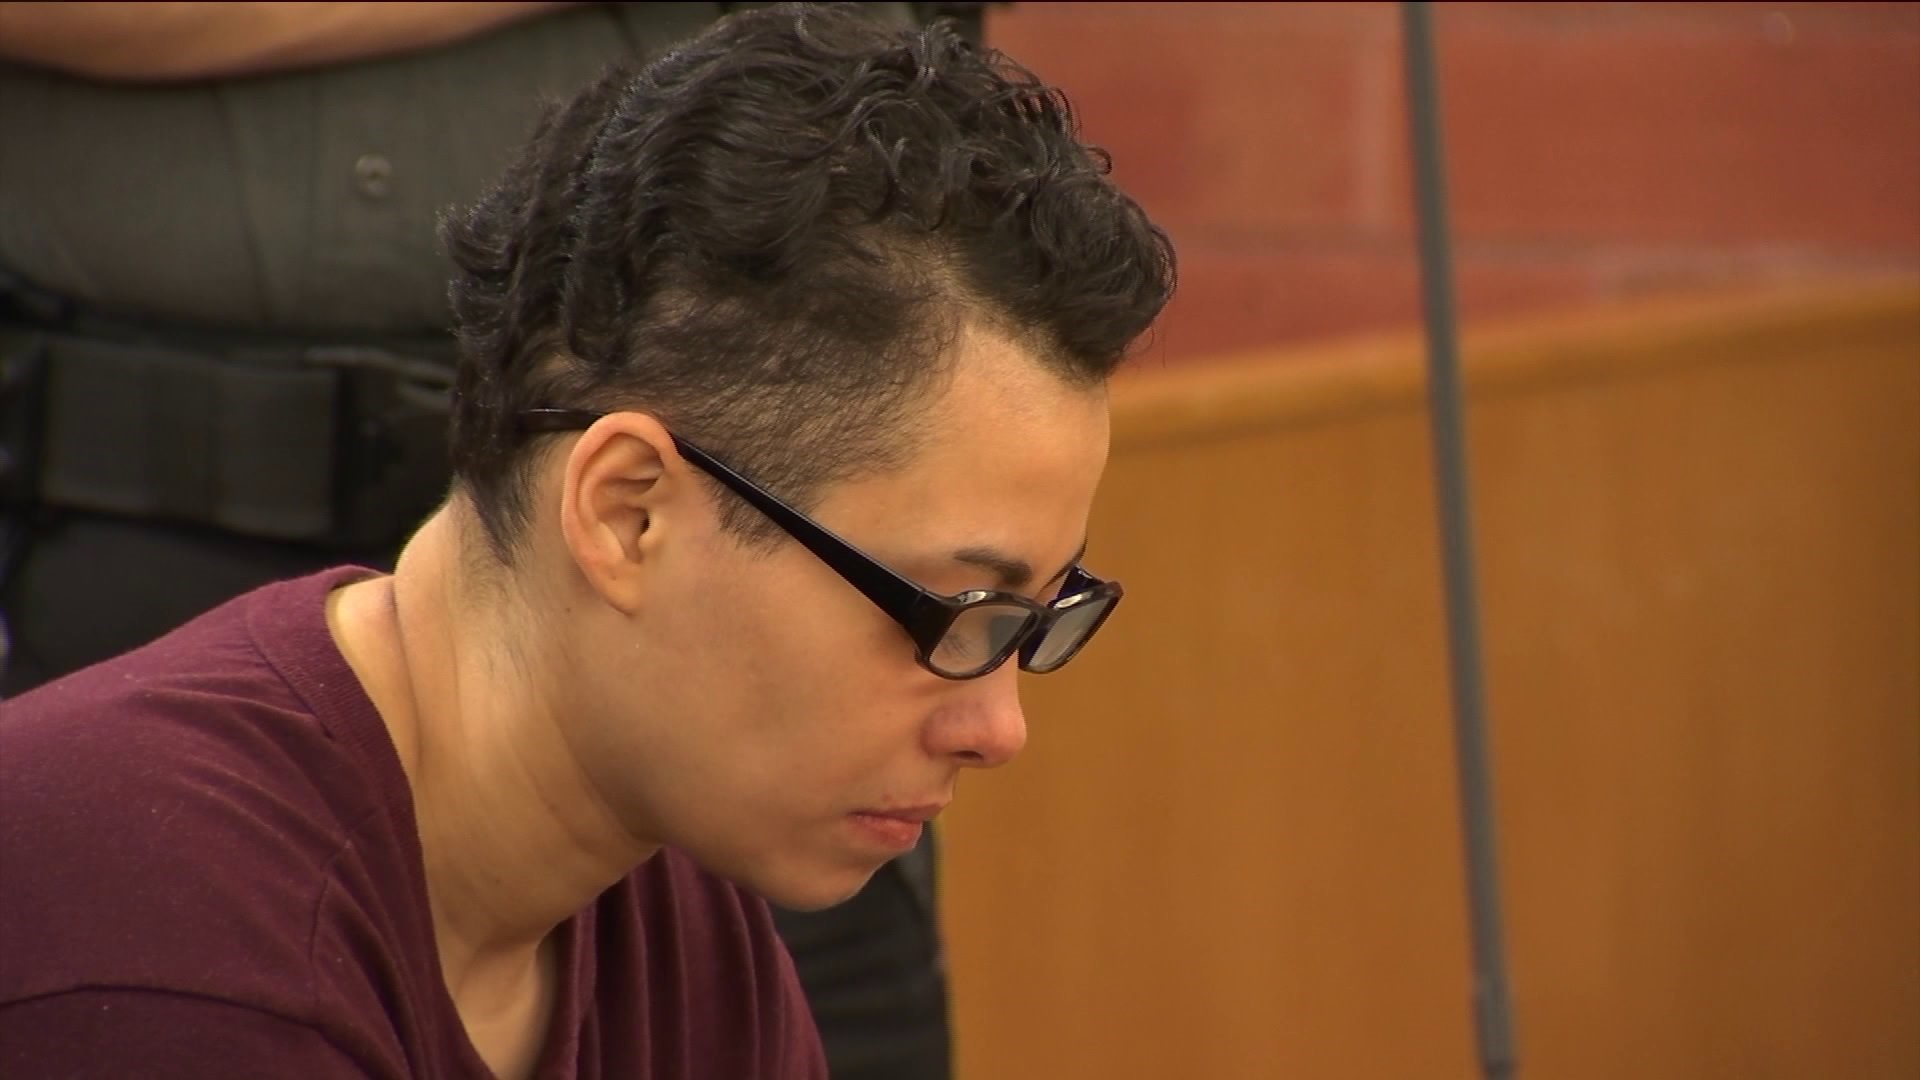 Mom who starved autistic son sentenced to 11 years in prison